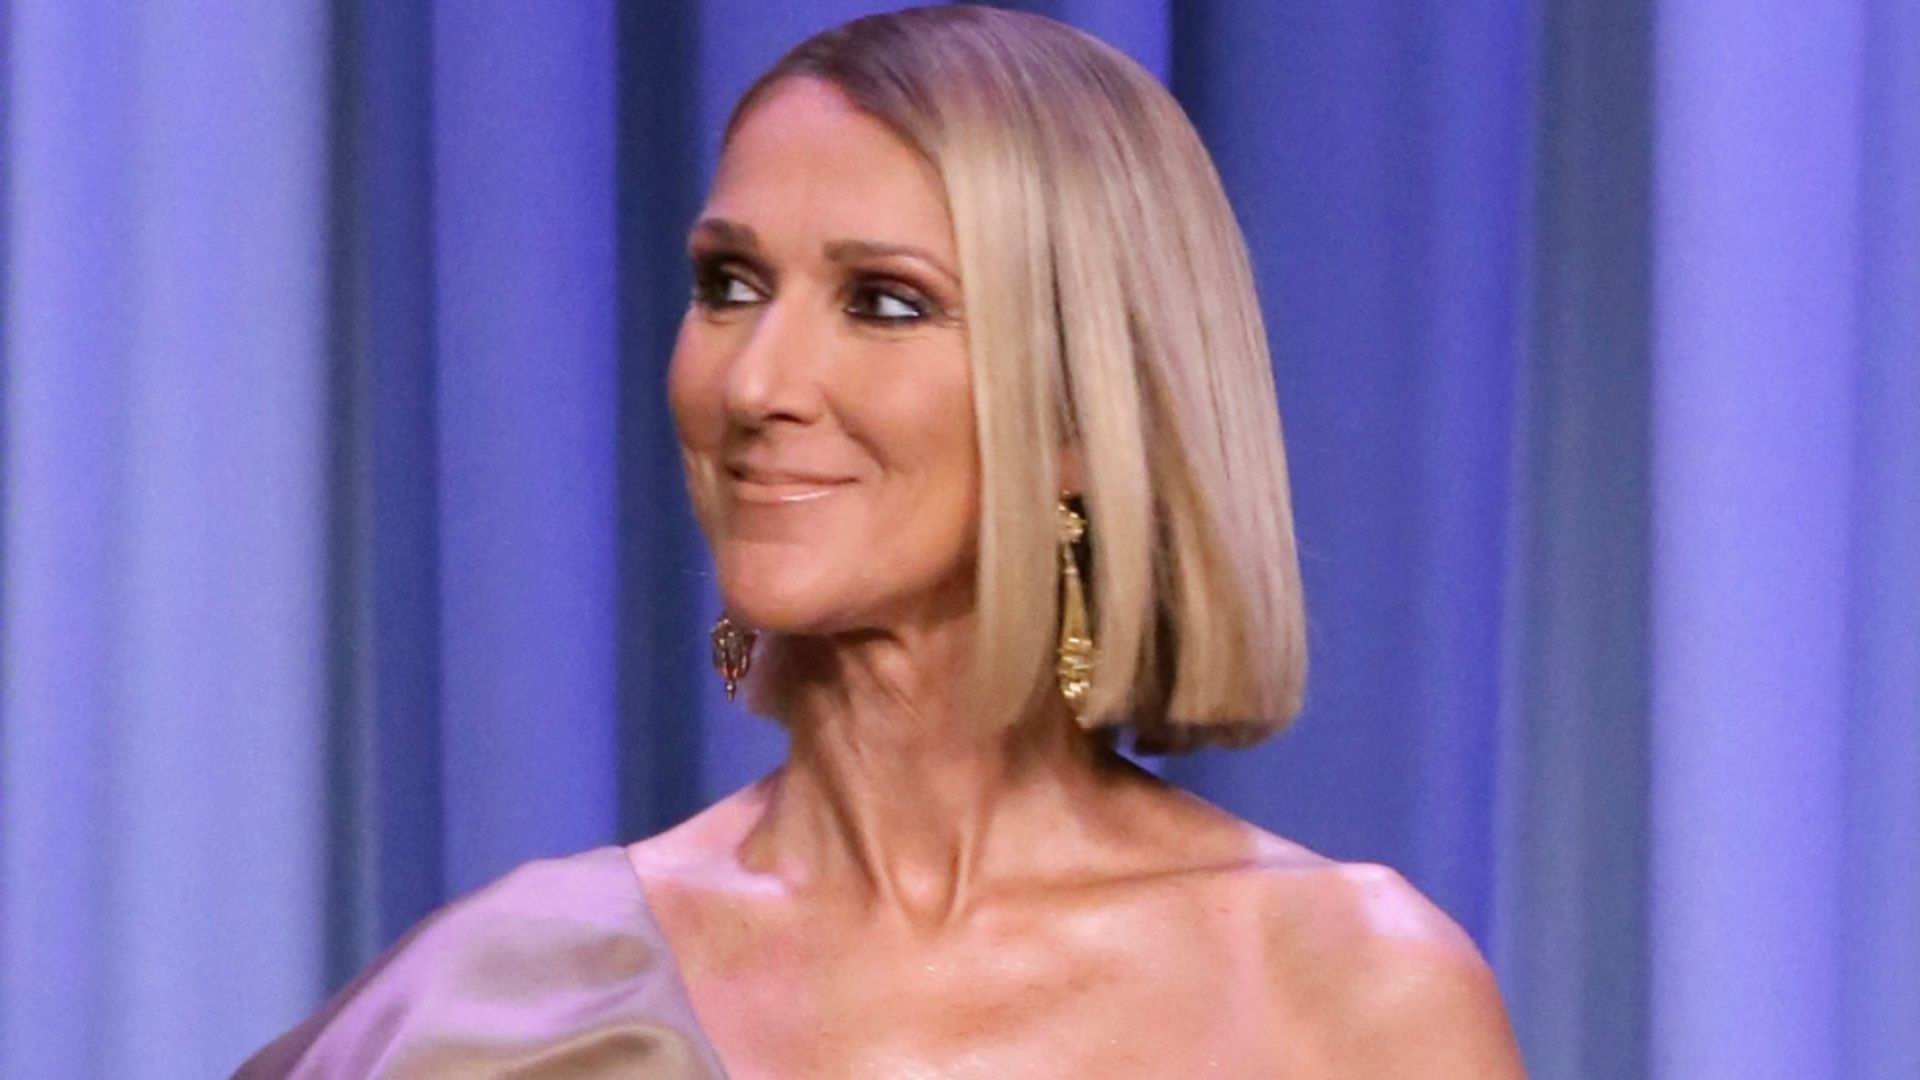 Celine Dion delights fans with rare family Christmas photograph